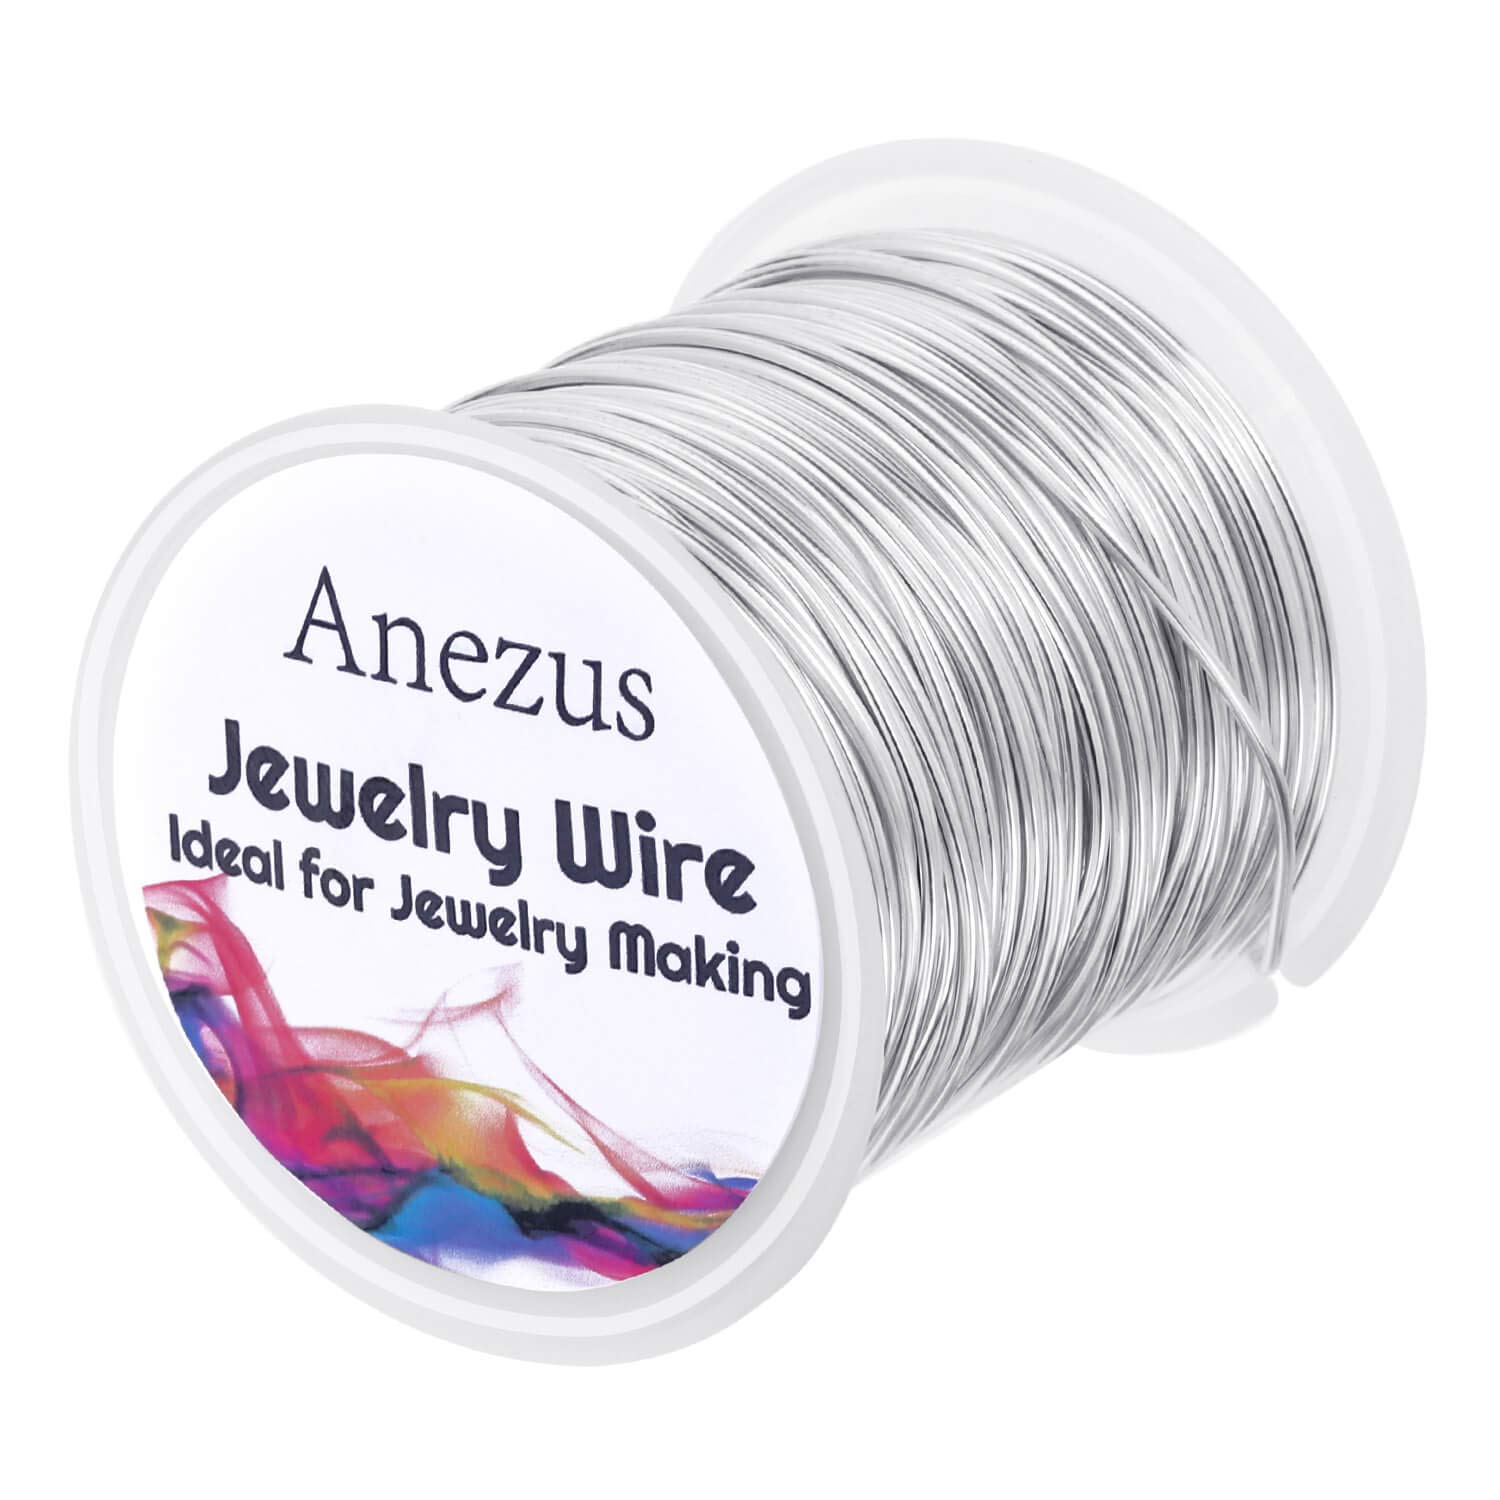 Anezus 18 Gauge Jewelry Wire for Jewelry Making, anezus Craft Wire